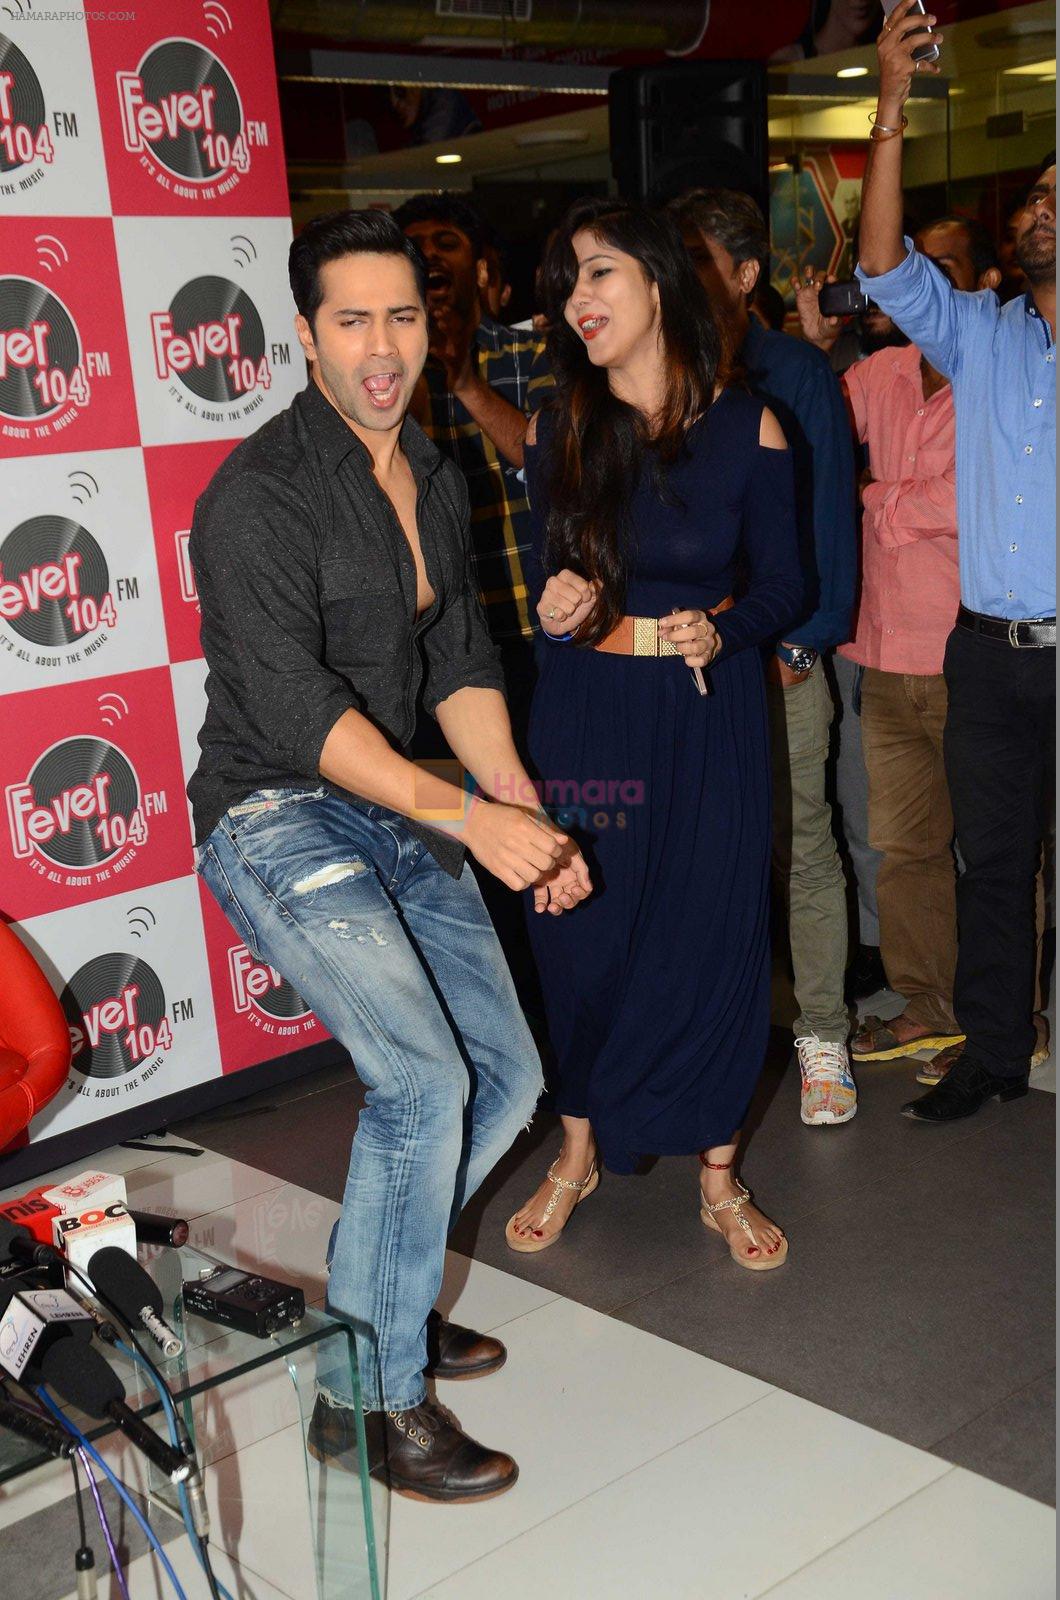 Varun Dhawan promote Dishoom on Fever 104 FM on 18th July 2016